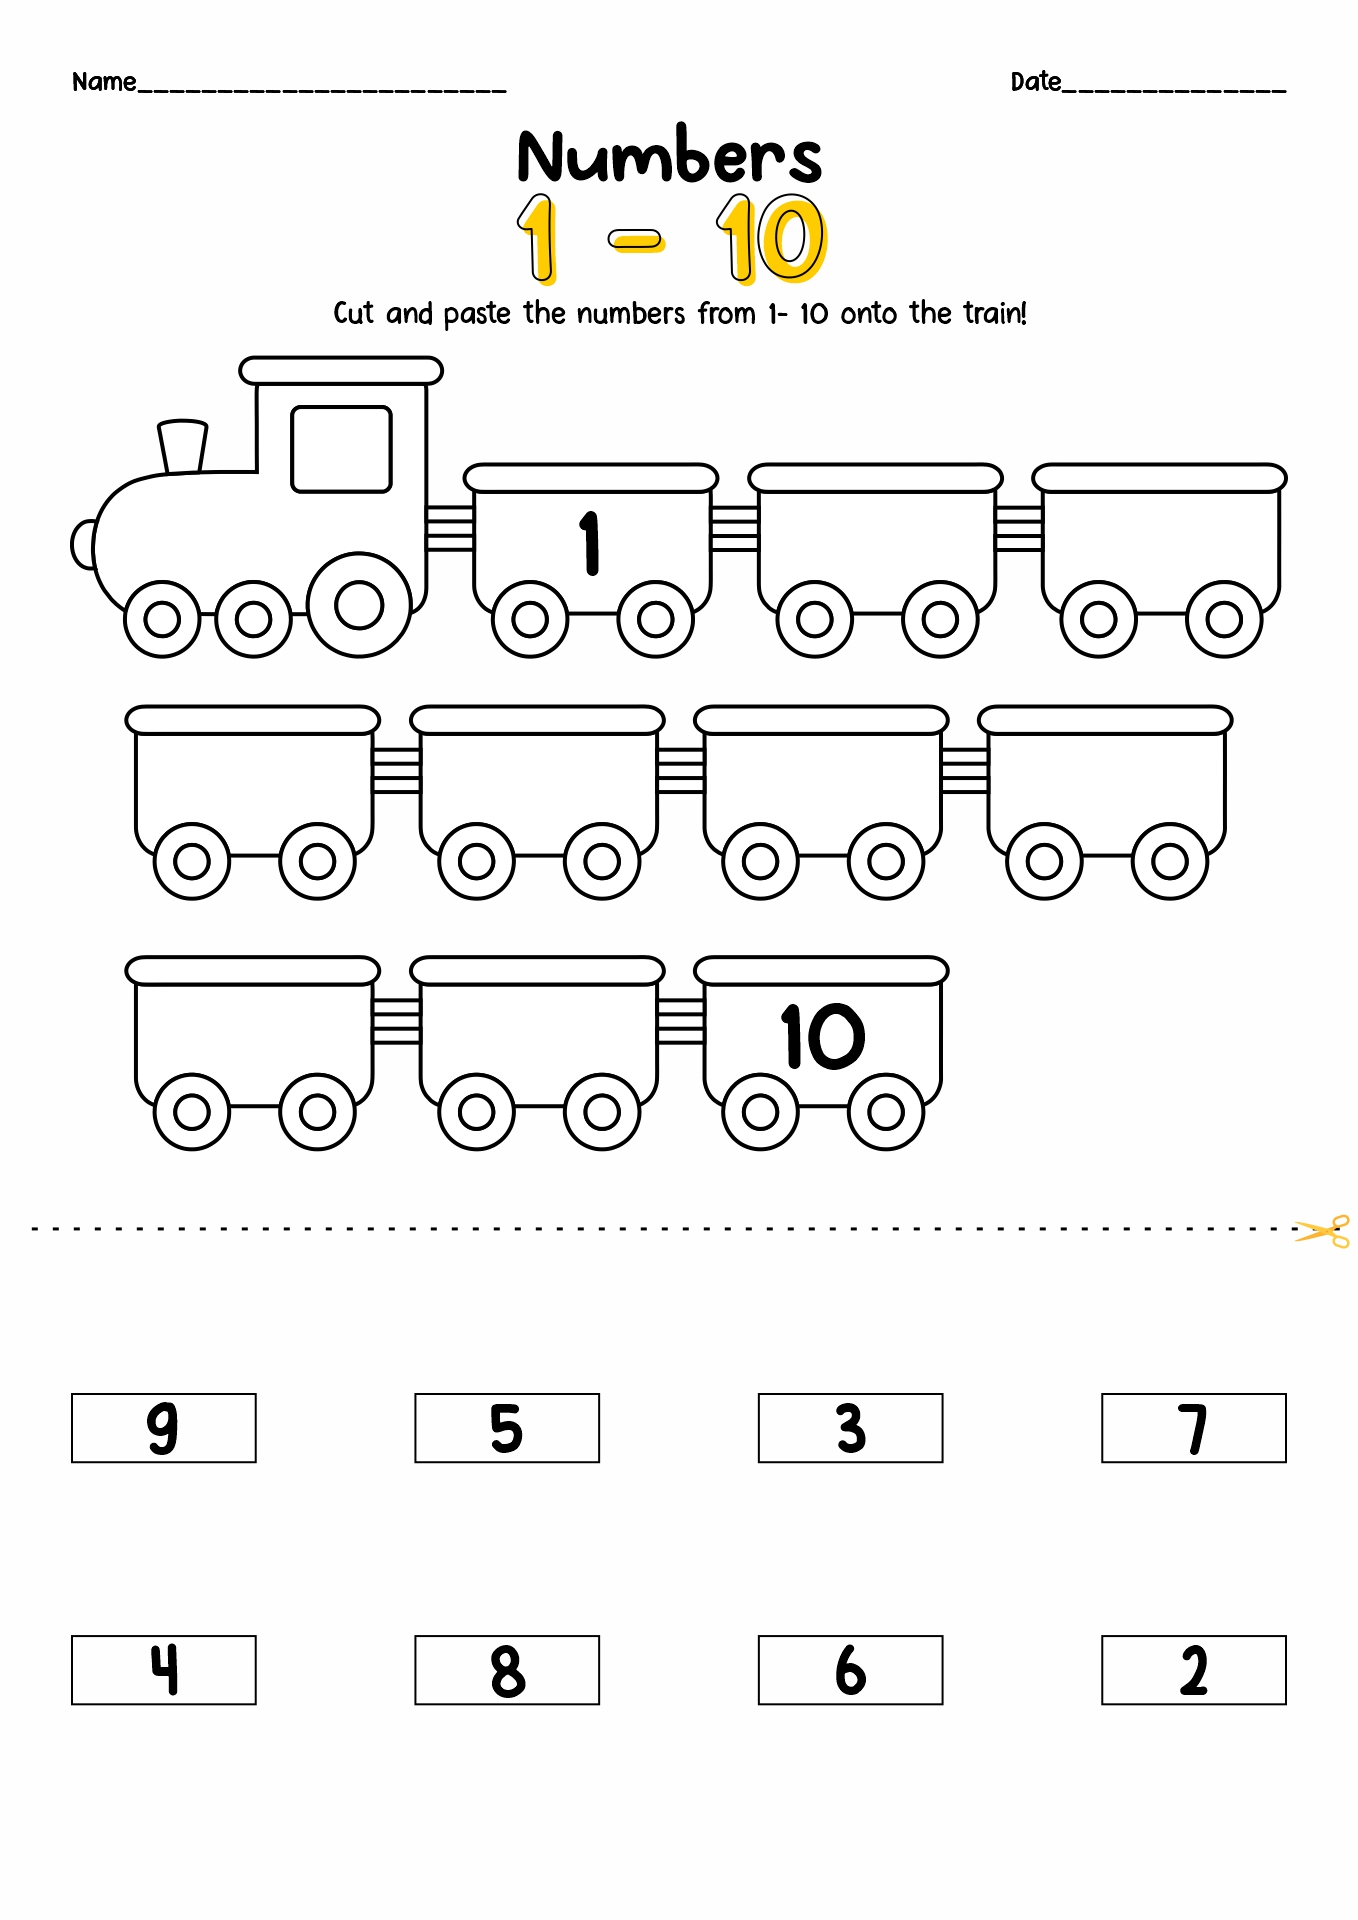 Cut and Paste Number Worksheets